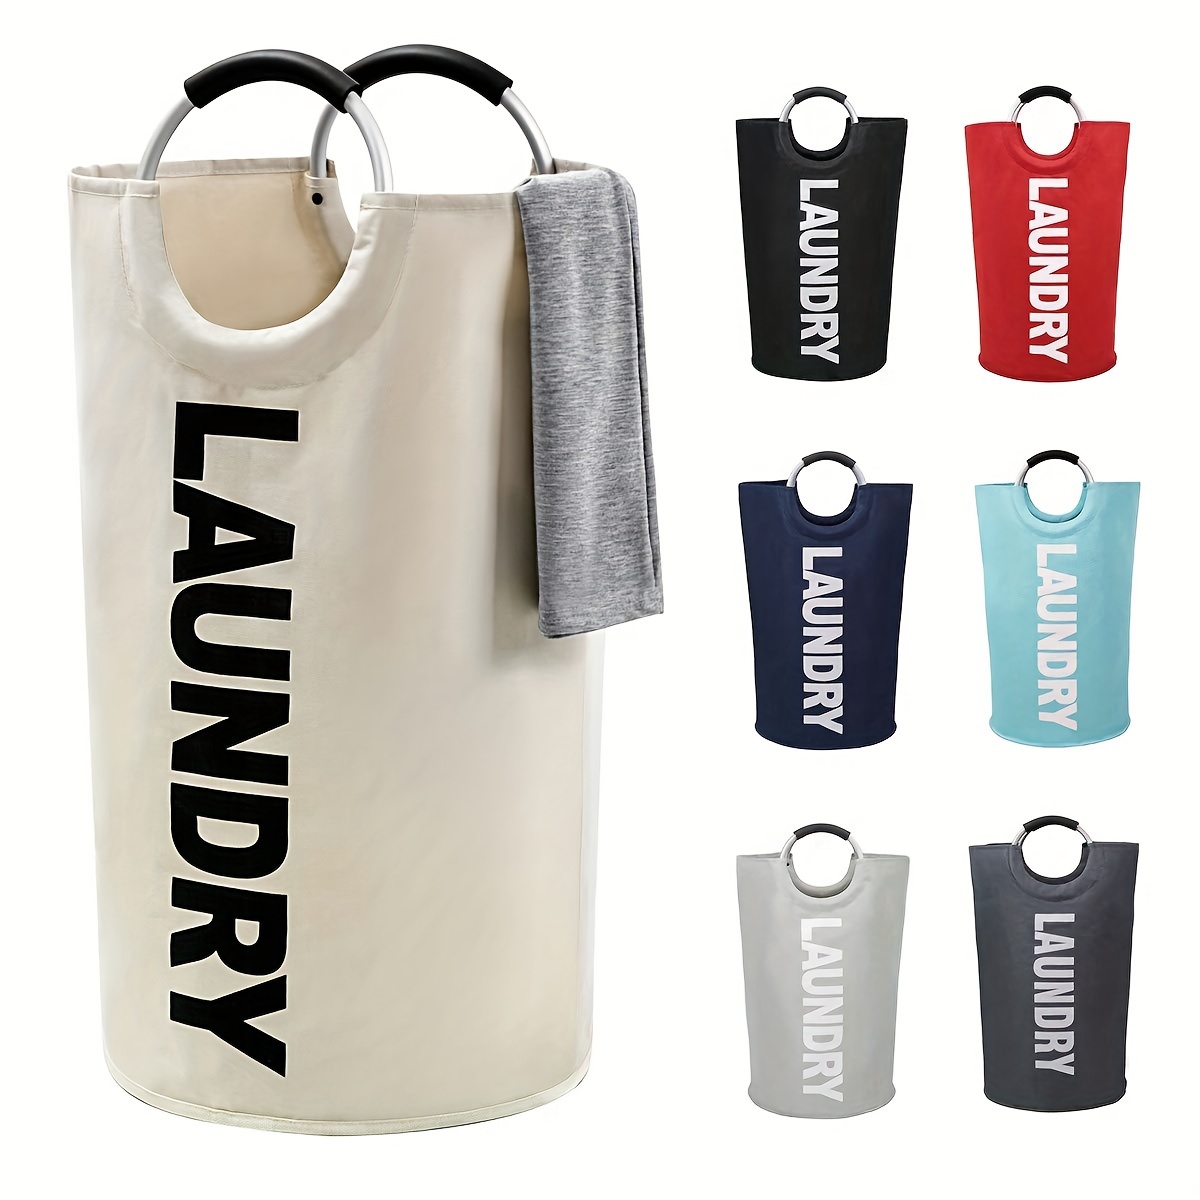 Waterproof Laundry Basket With Padded Handles - Collapsible Clothes ...